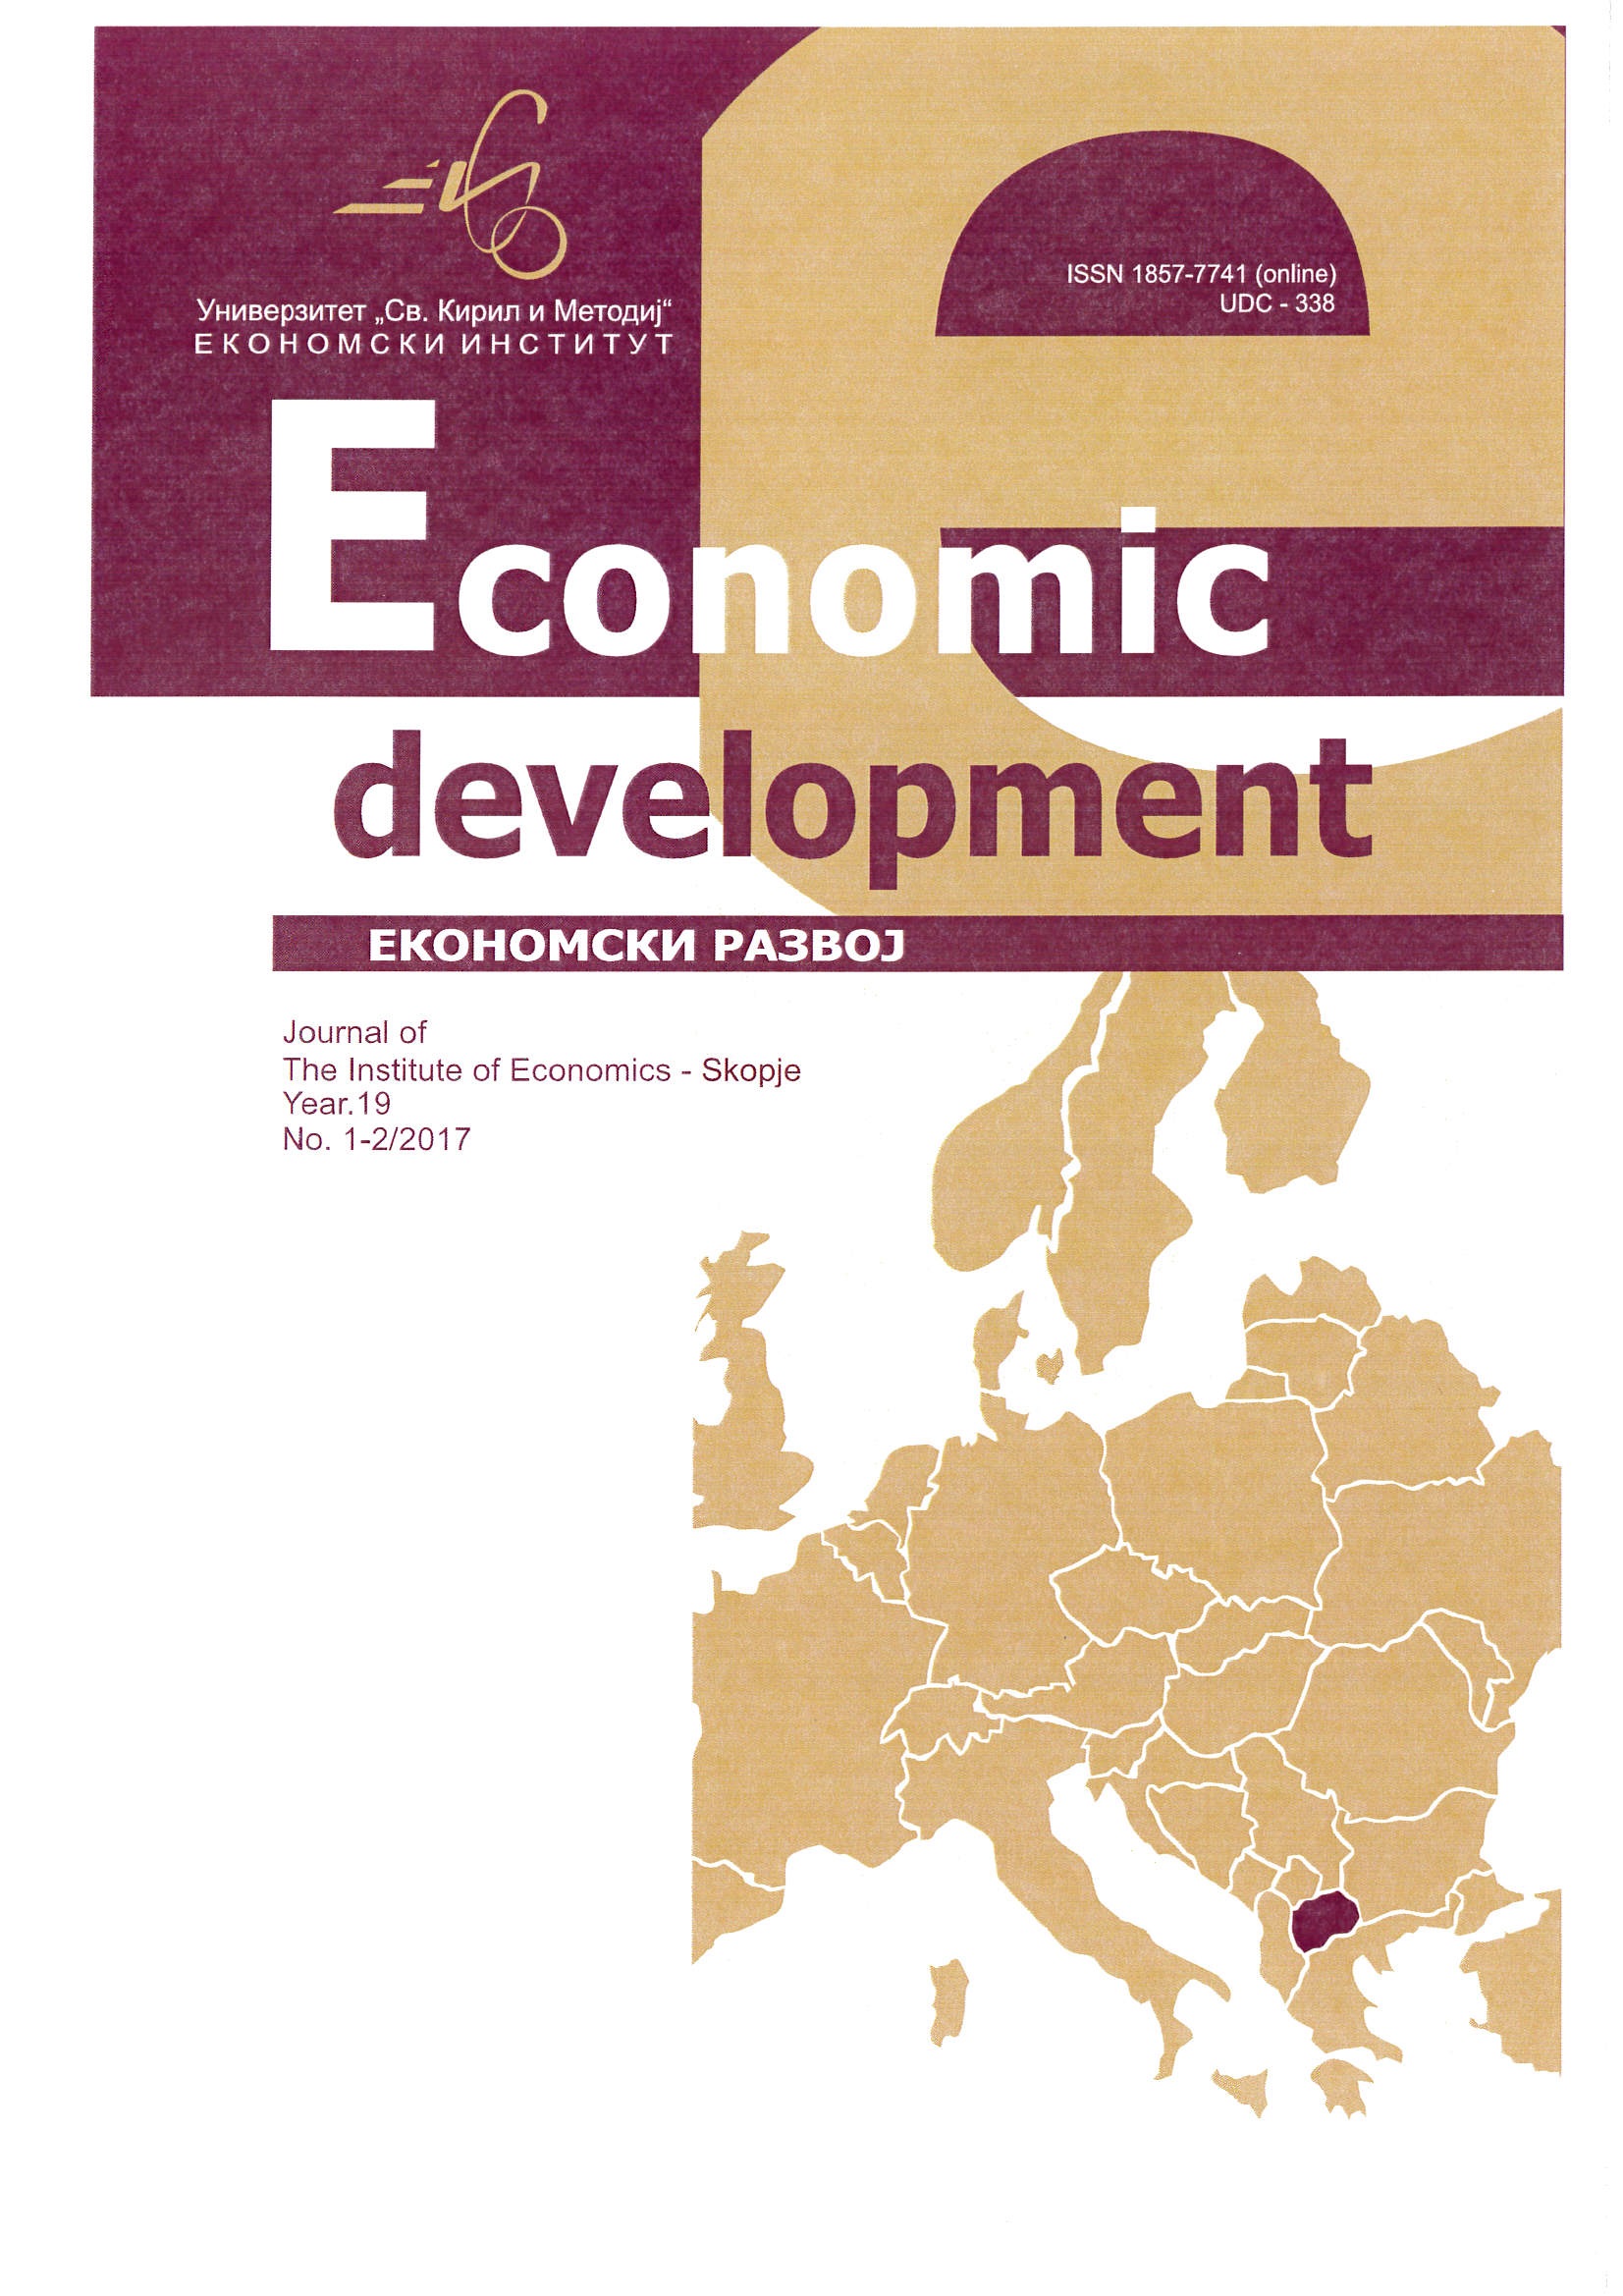 Fluctuation of public debt and the issue of its sustainability - the case of the Republic of Macedonia Cover Image